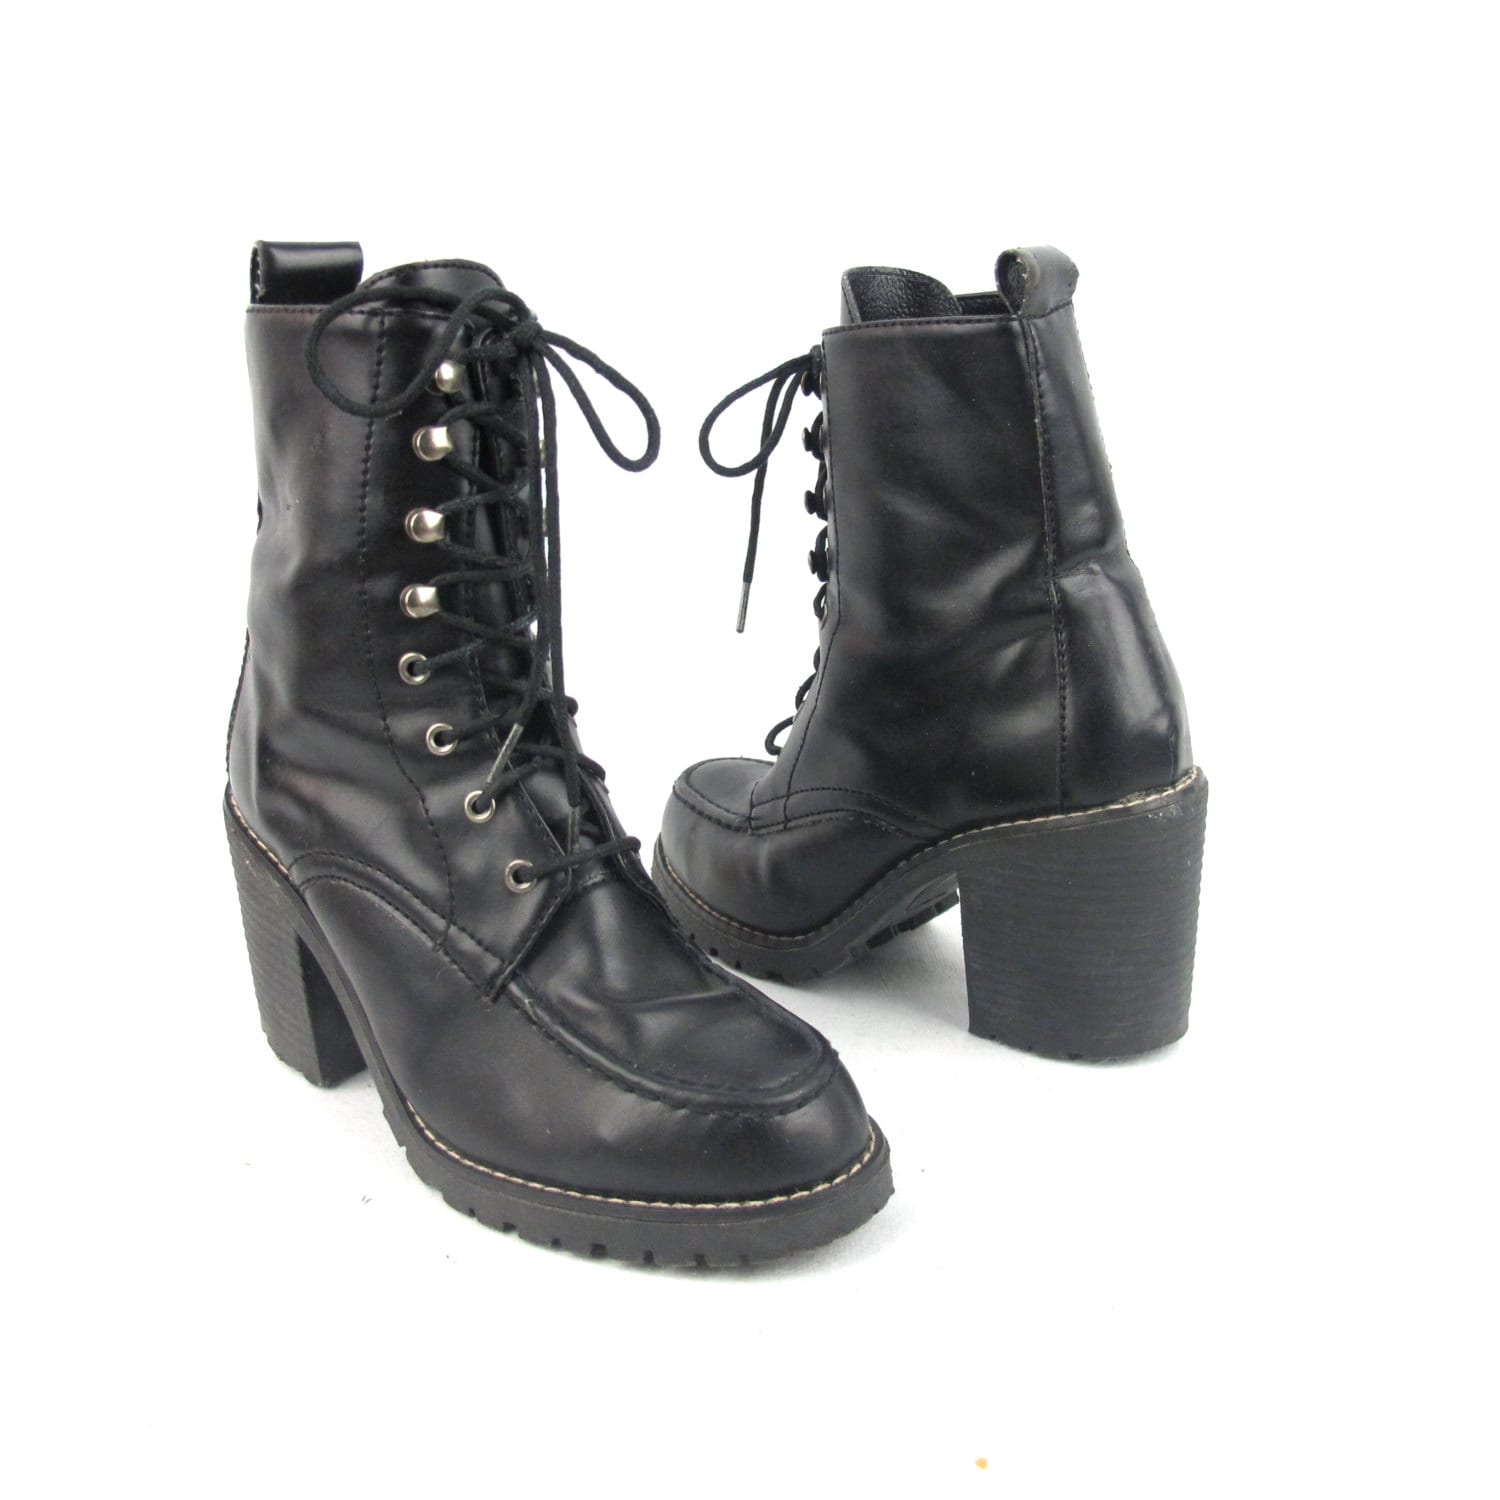 90s Grunge Lace Up Boots Black Chunky Heel Ankle Boots Vegan